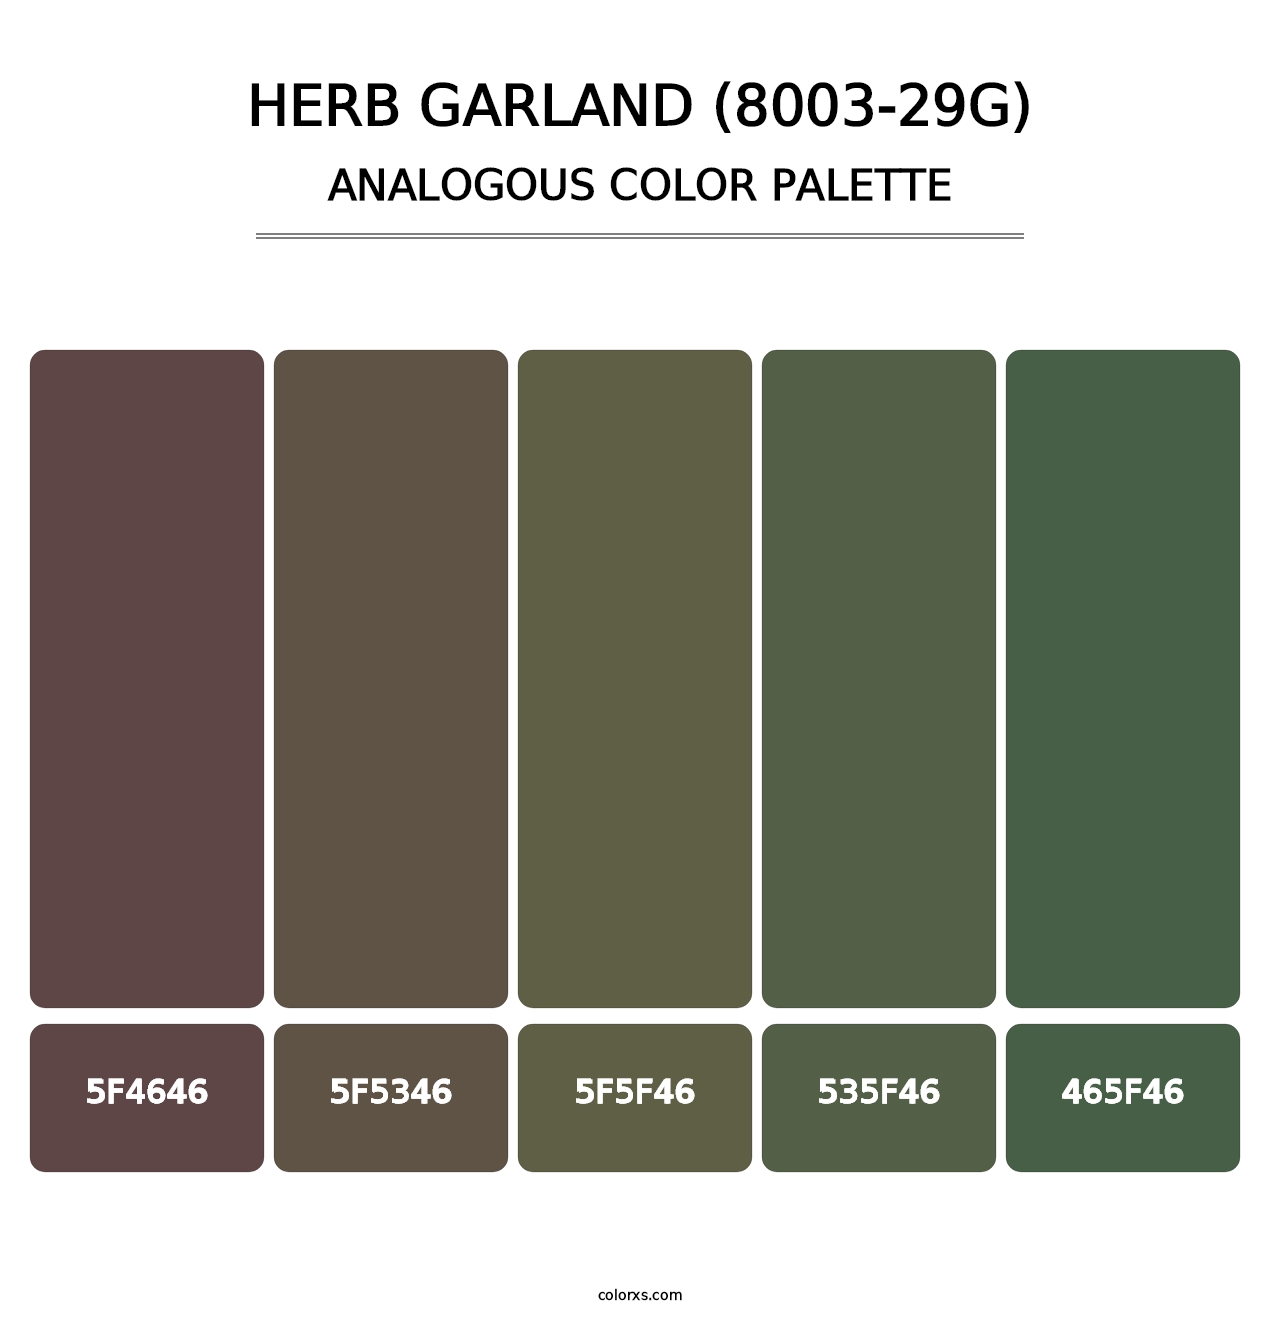 Herb Garland (8003-29G) - Analogous Color Palette